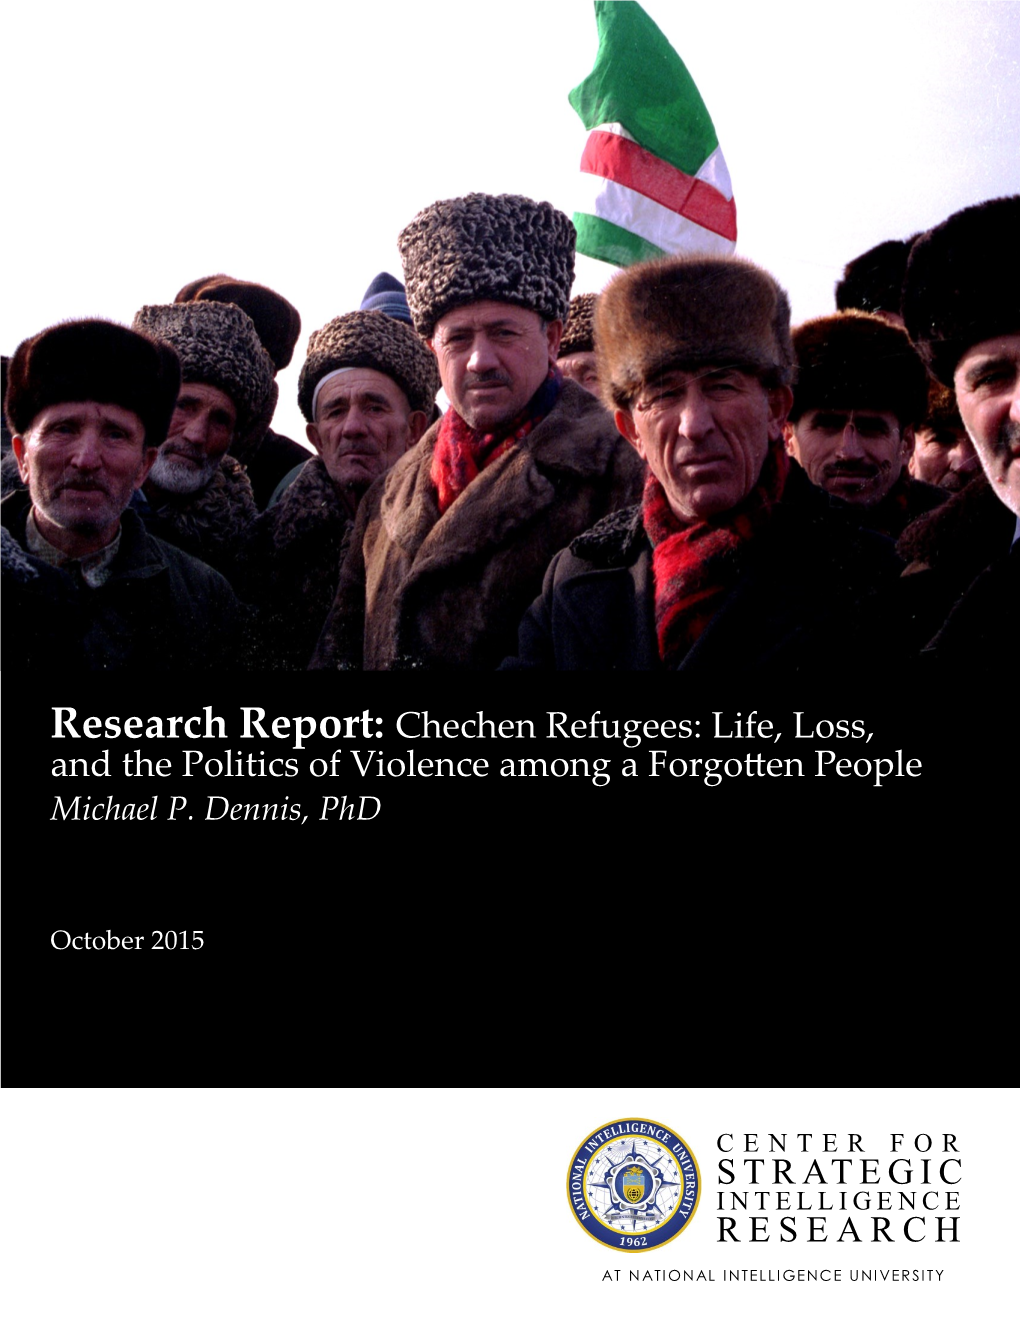 Research Report: Chechen Refugees: Life, Loss, and the Politics of Violence Among a Forgotten People Michael P